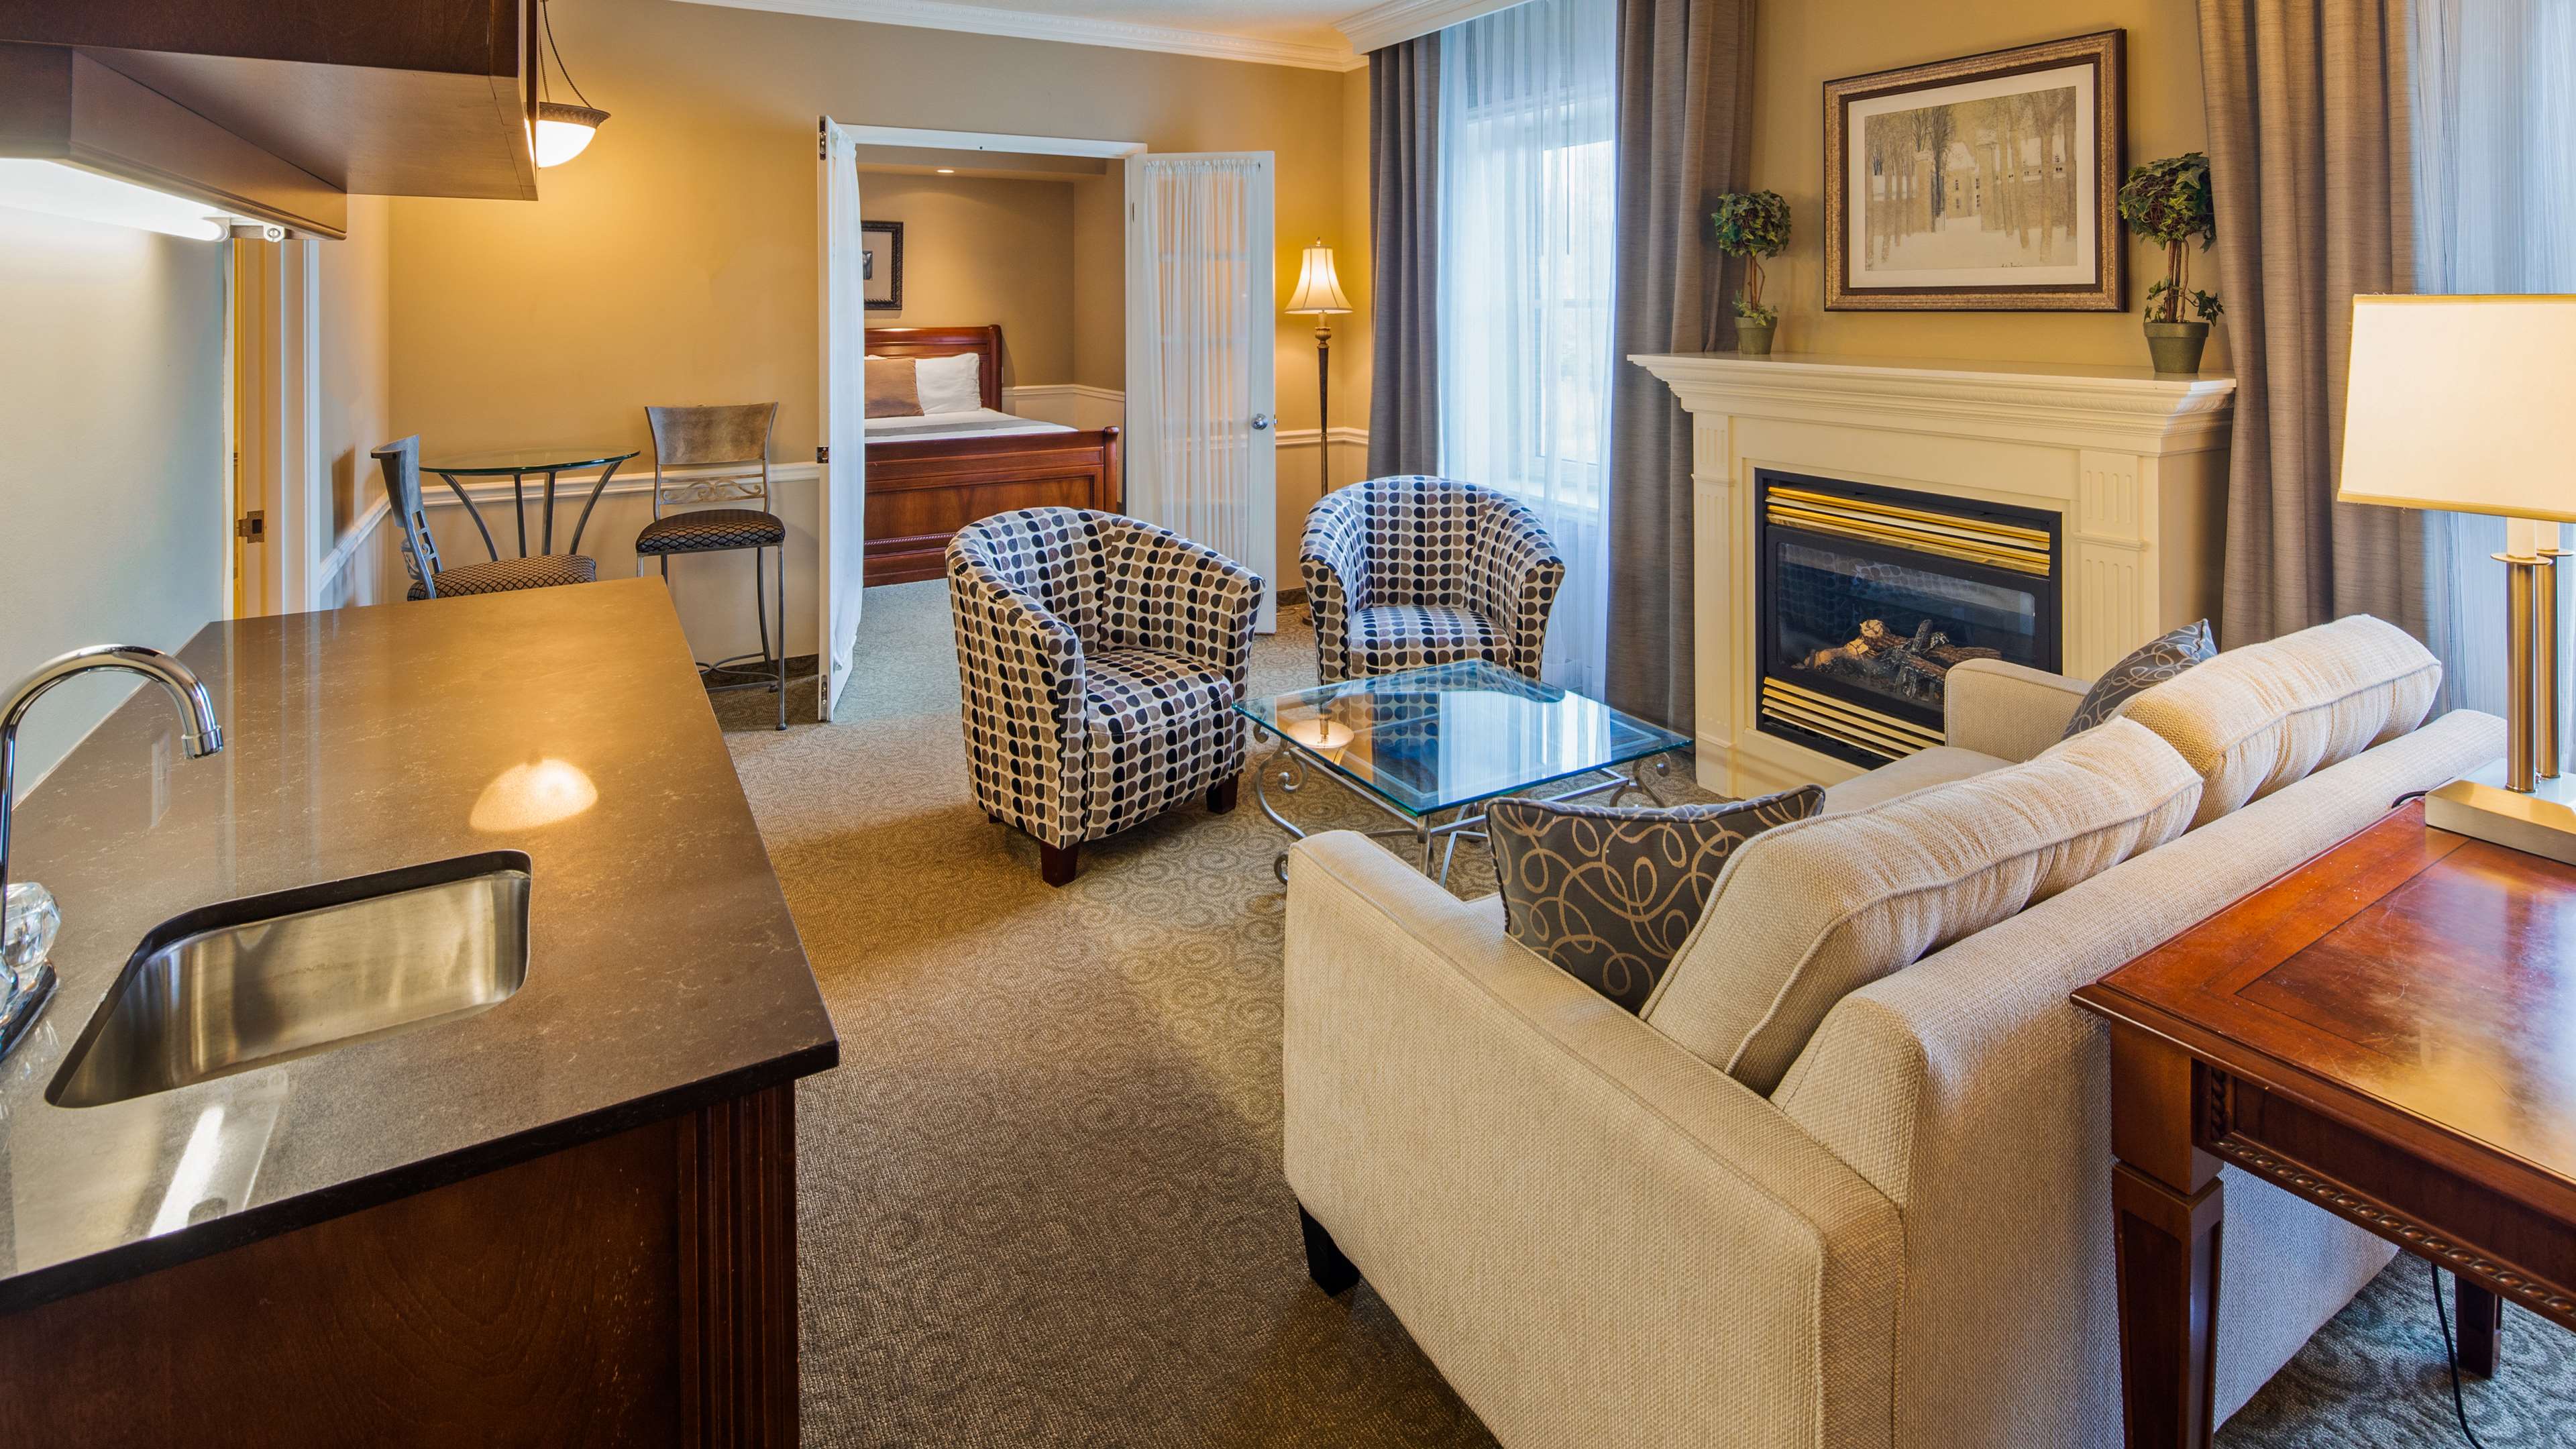 Suite with two queen beds Best Western Plus The Arden Park Hotel Stratford (519)275-2936